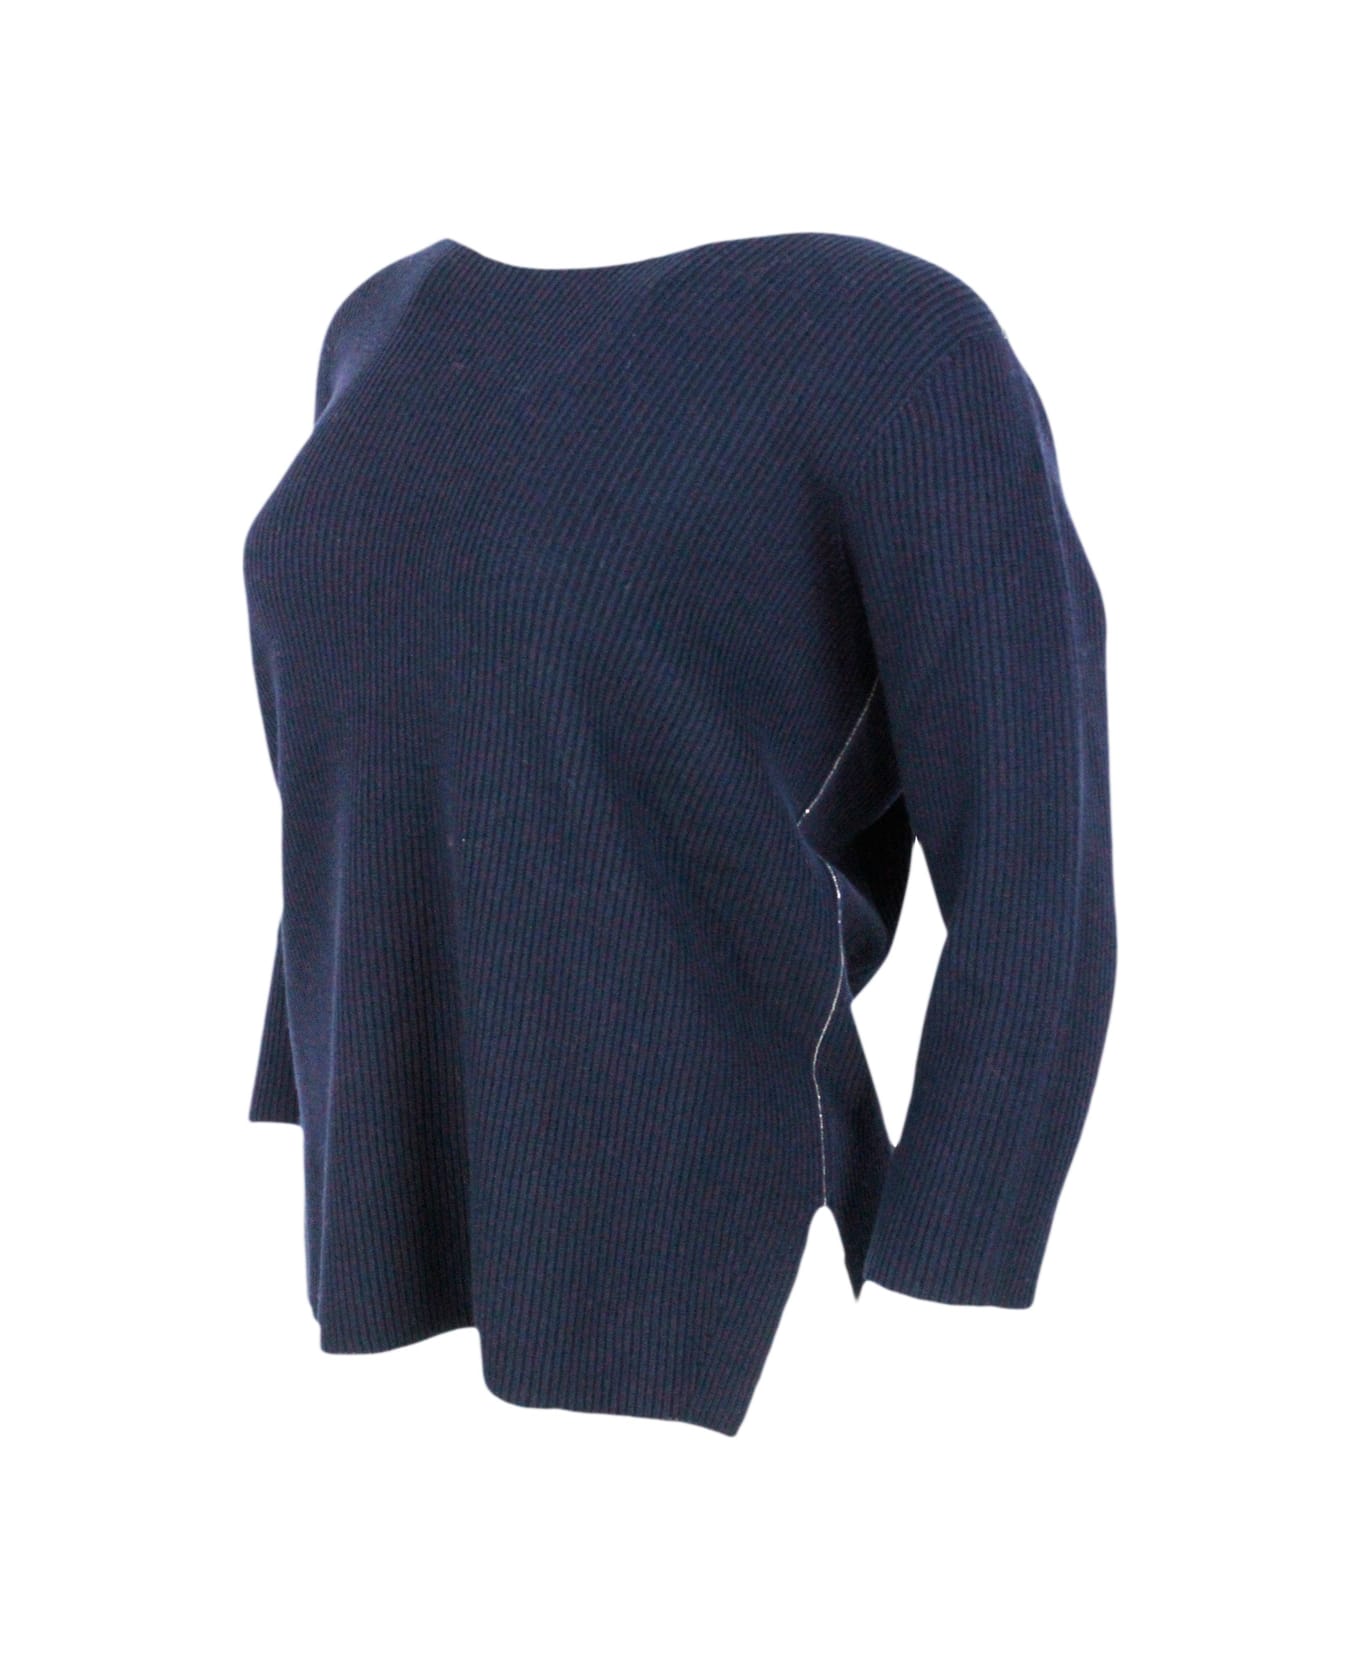 Fabiana Filippi Long-sleeved Boat-neck Sweater In Wool And Cotton Embellished With Brilliant Monili On The Neck - Blu